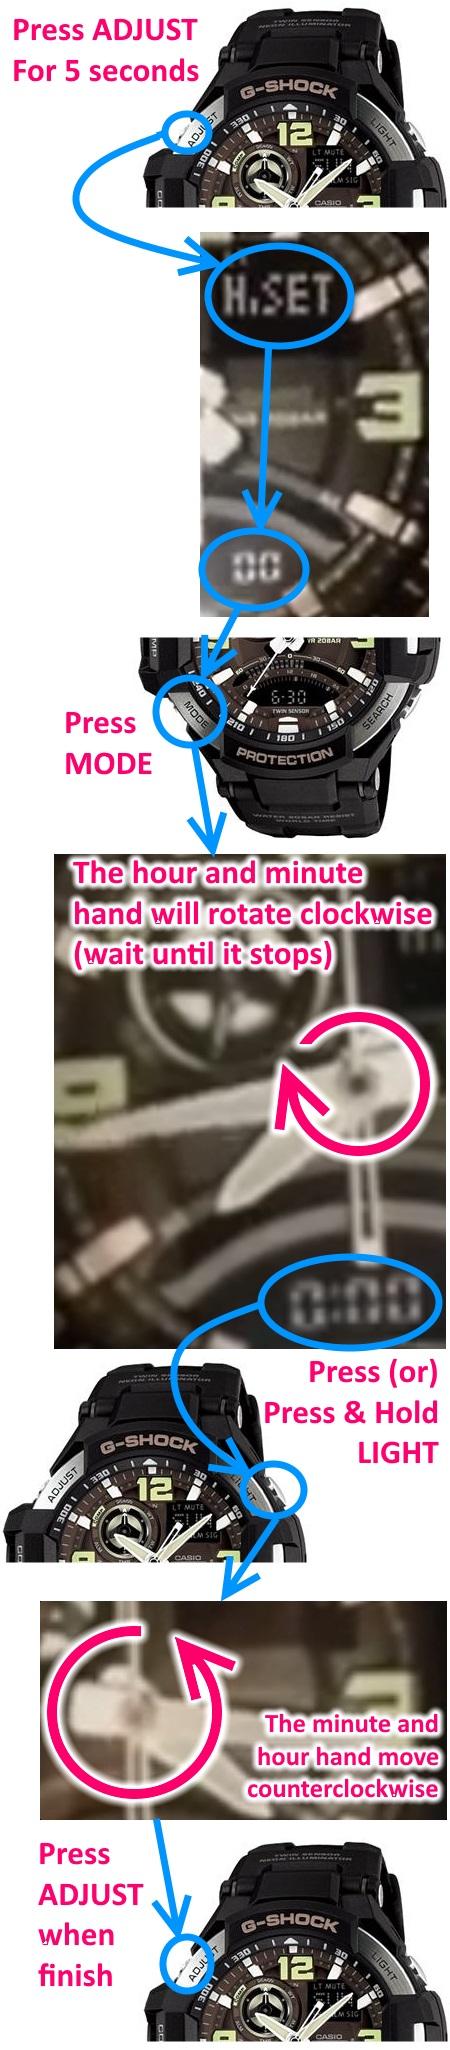 my g shock time is wrong